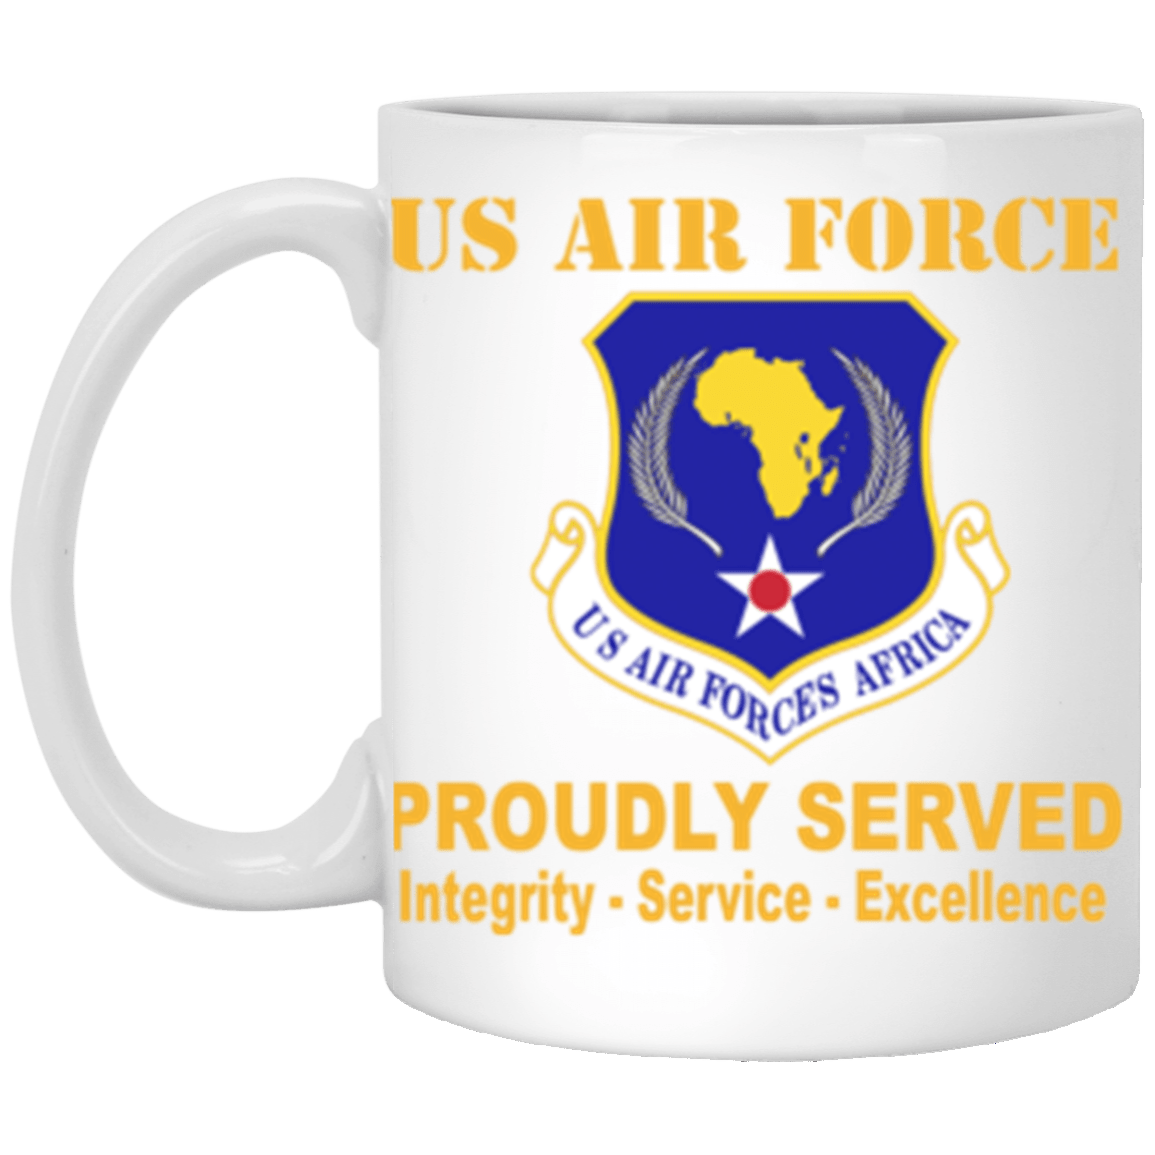 US Air Force United States Air Forces Africa Proudly Served Core Values 11 oz. White Mug-Drinkware-Veterans Nation